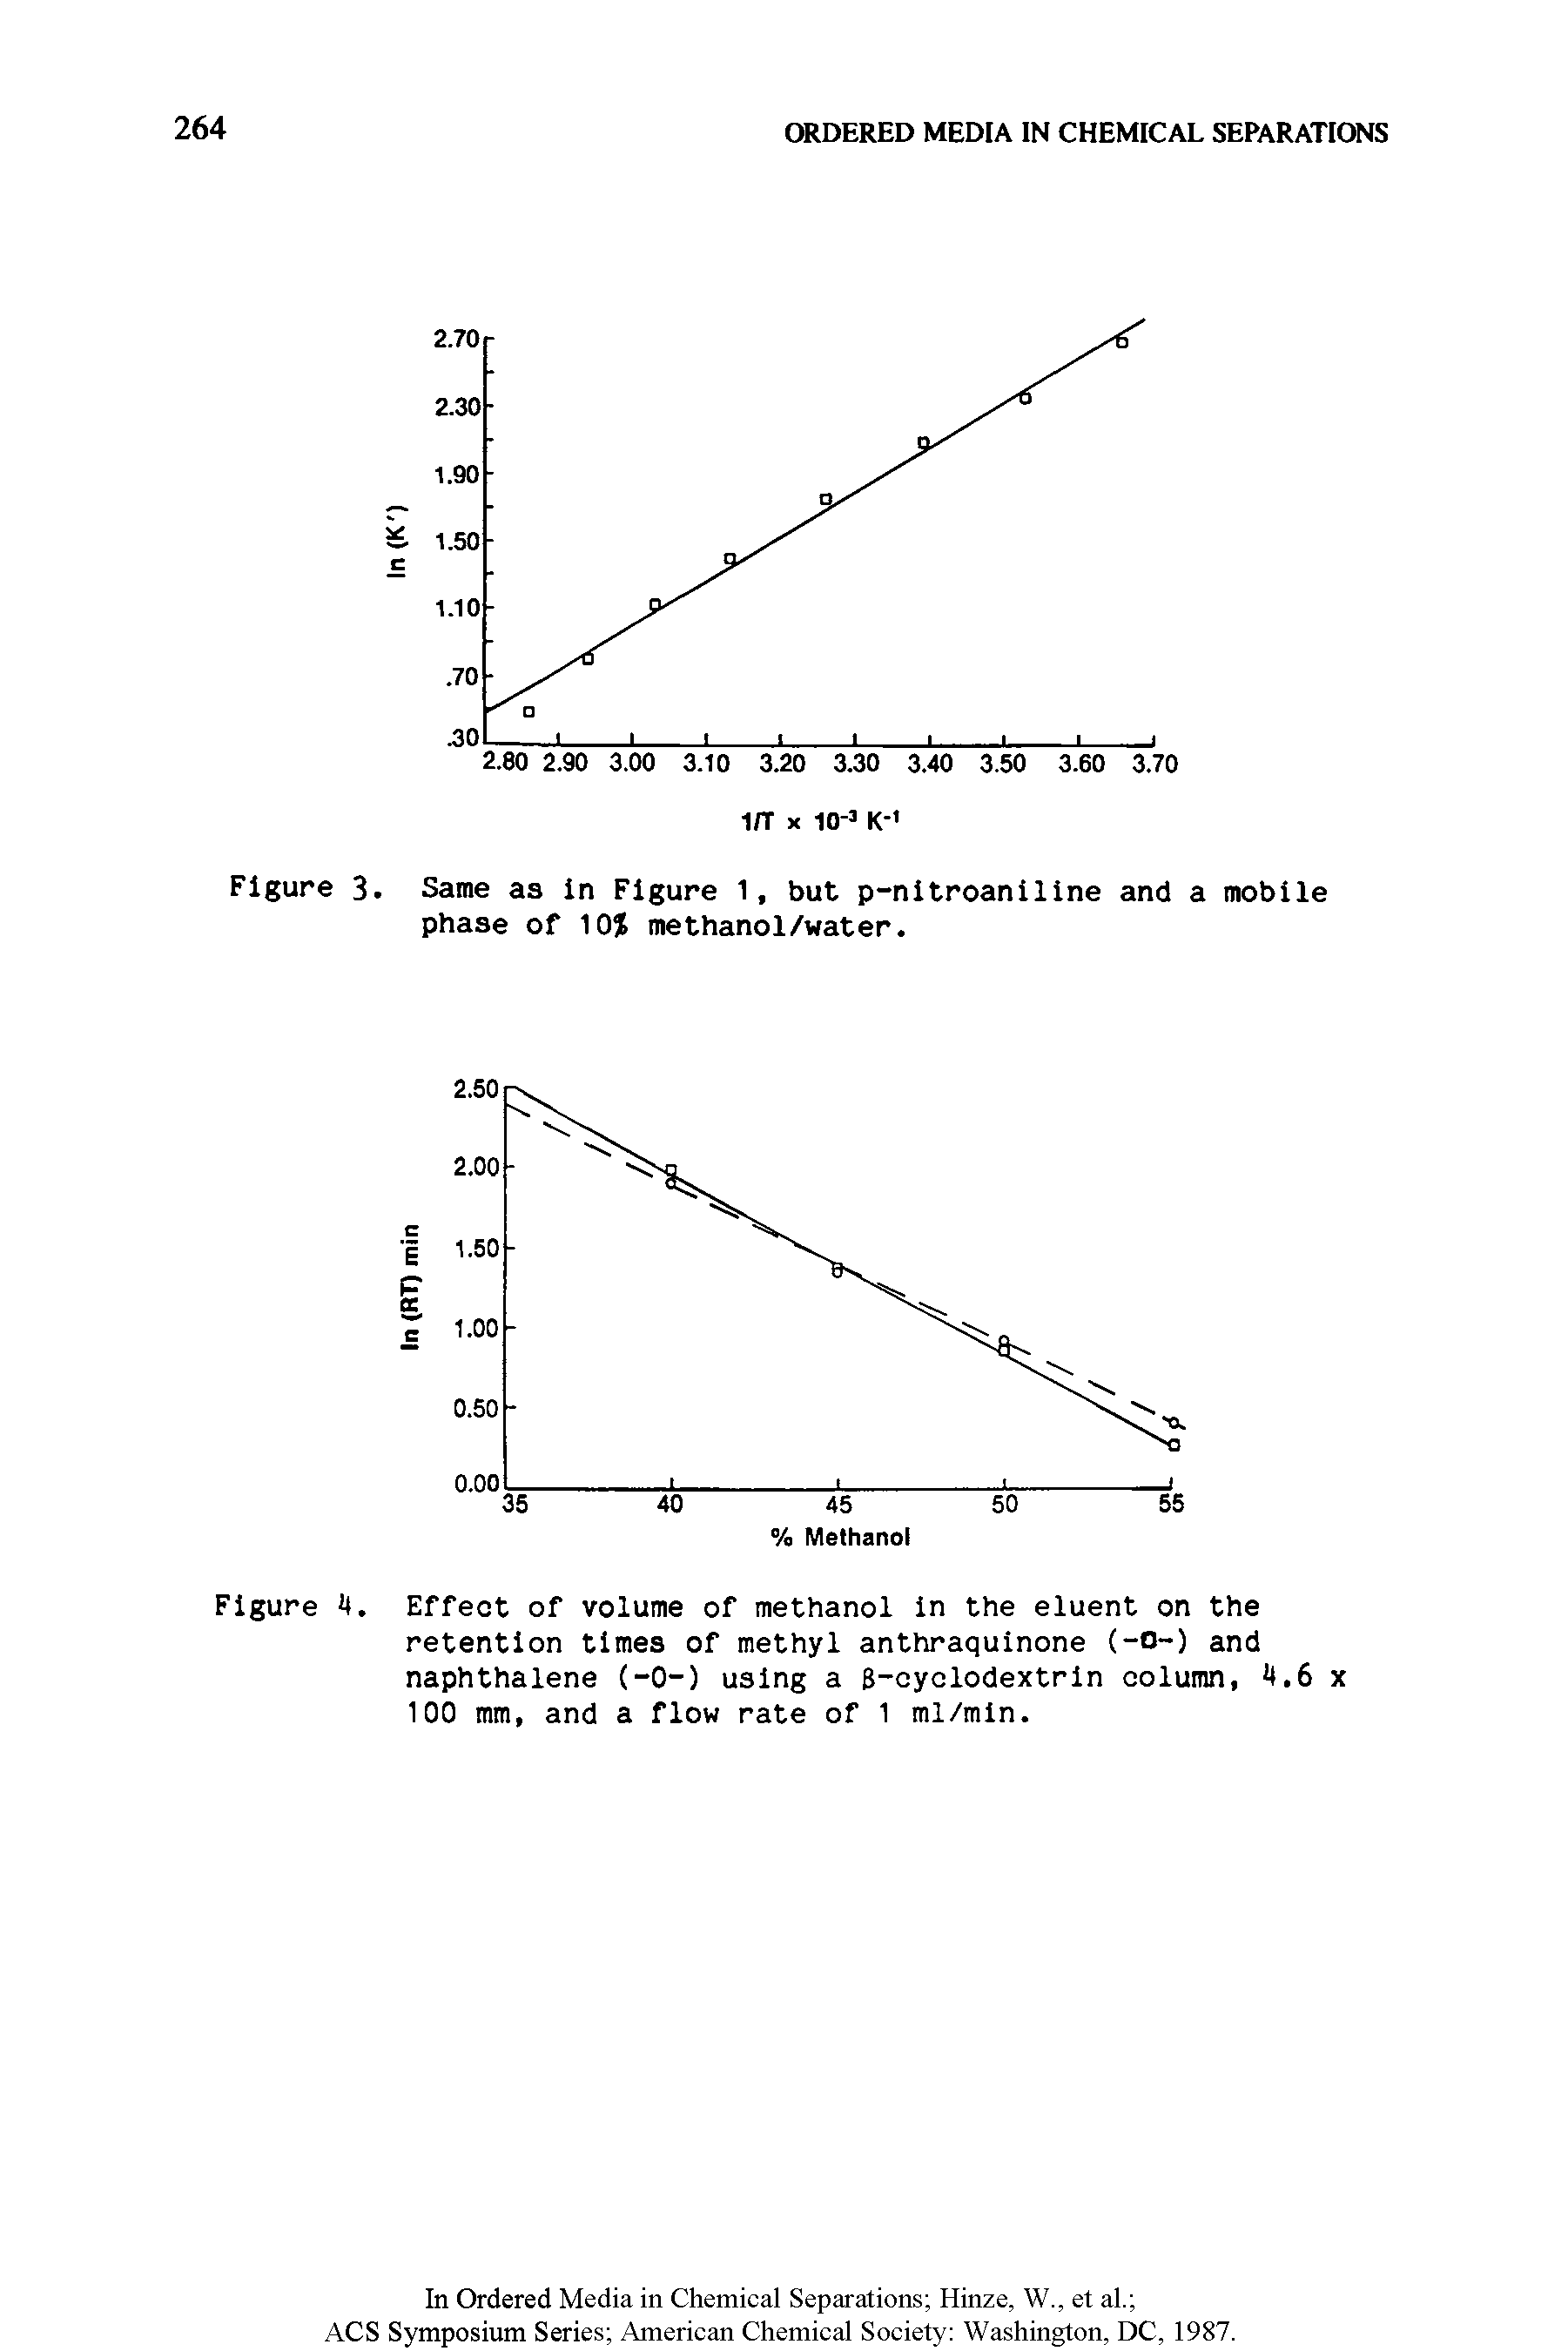 Figure Effect of volume of methanol in the eluent on the retention times of methyl anthraquinone (-0-) and naphthalene (-0-) using a B-cyclodextrin column, 4,6 x 100 mm, and a flow rate of 1 ml/min.